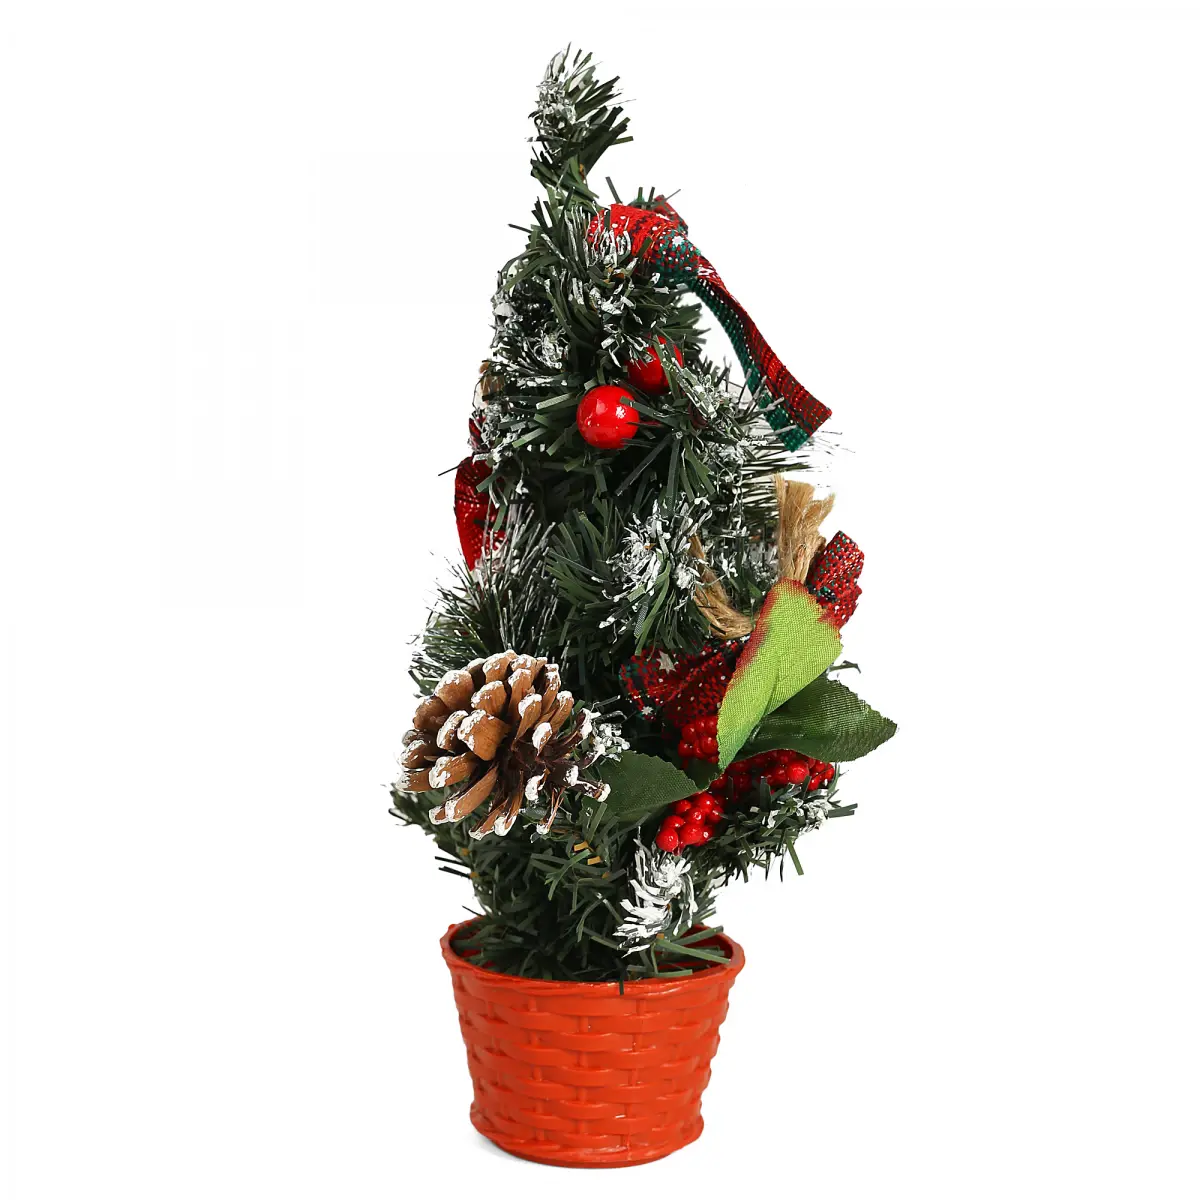 Boing Christmas Tree Decorations, 30cm, Red